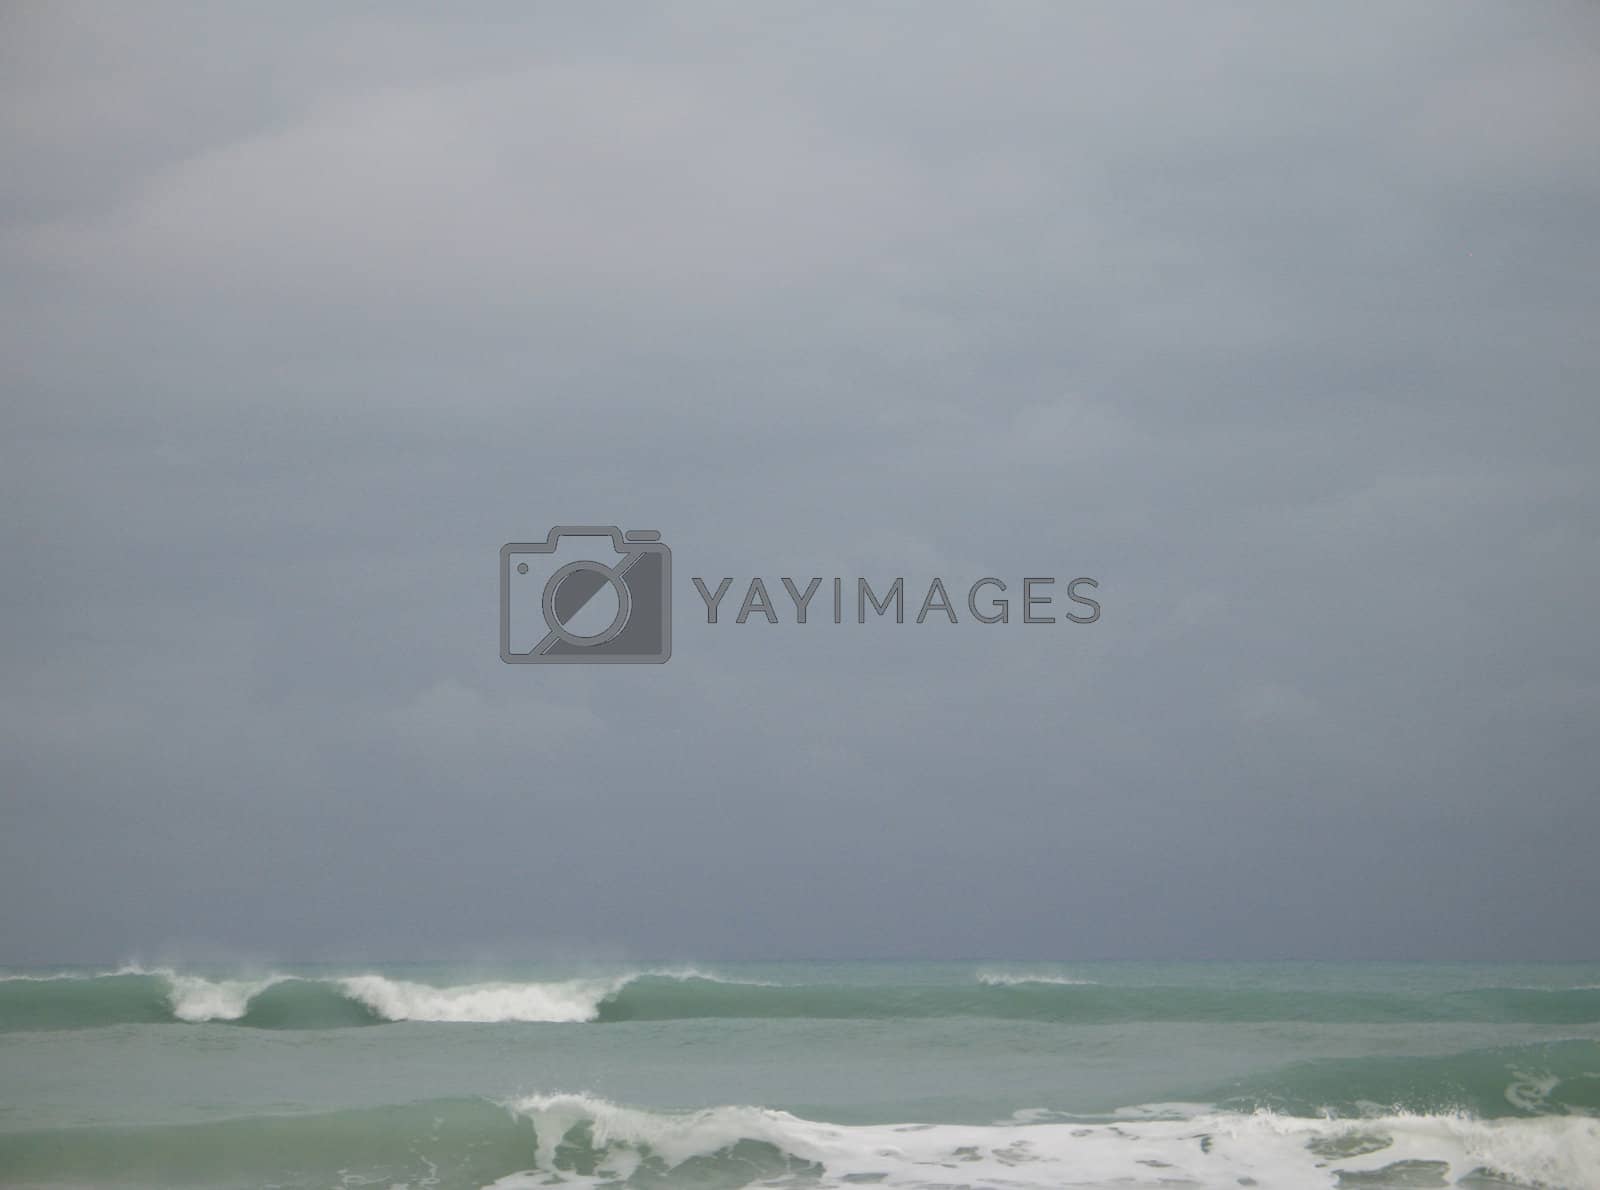 Royalty free image of tropical ocean view by mmm